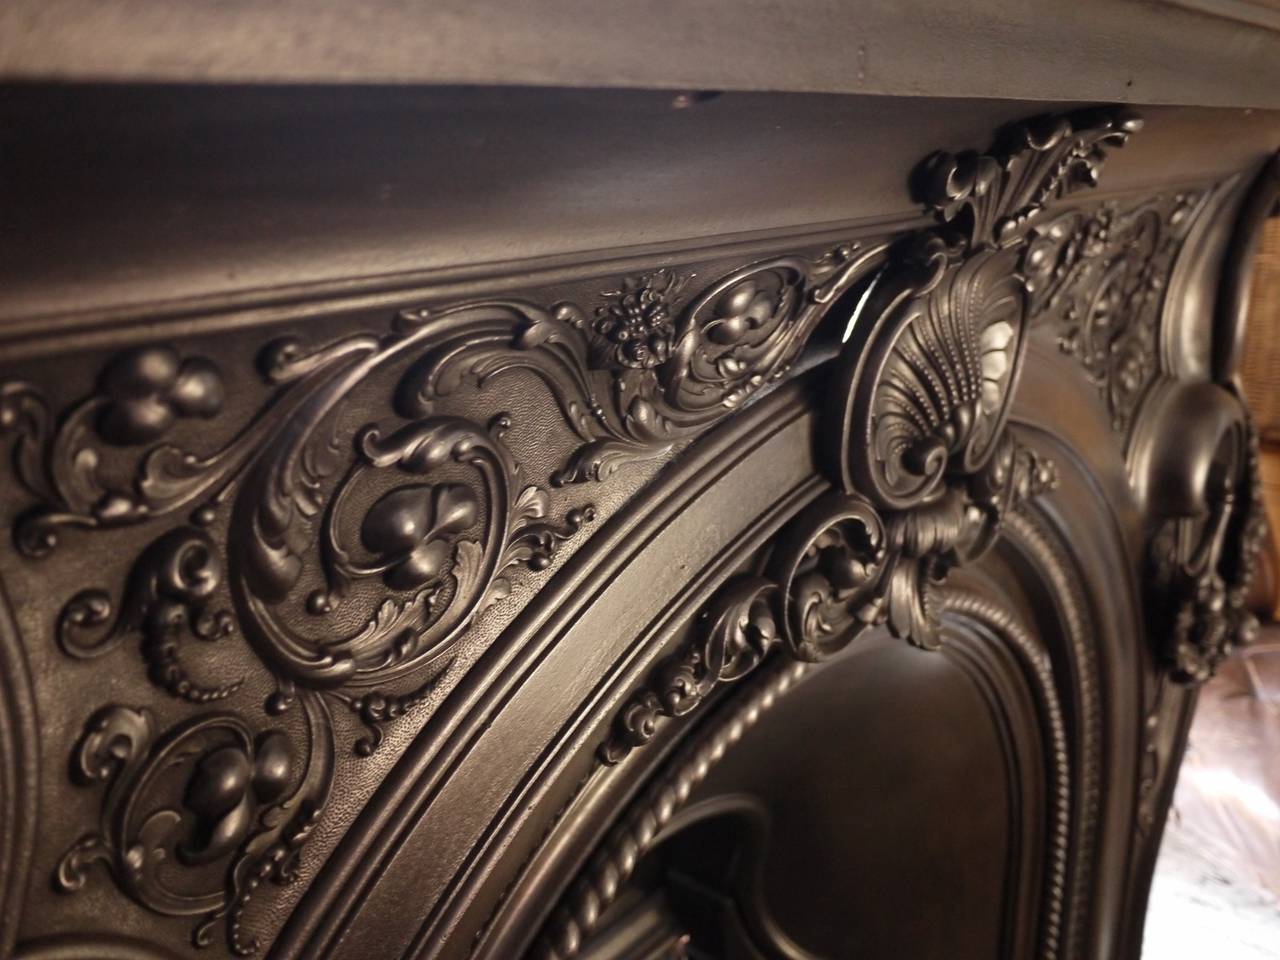 Superb quality Mid-Victorian English cast iron fire surround complete with register in the Rococo style. Kite mark dated to 1852. Finely cast detail in the fruit laden swags, floral breast plate and the scalloped central shell motif.